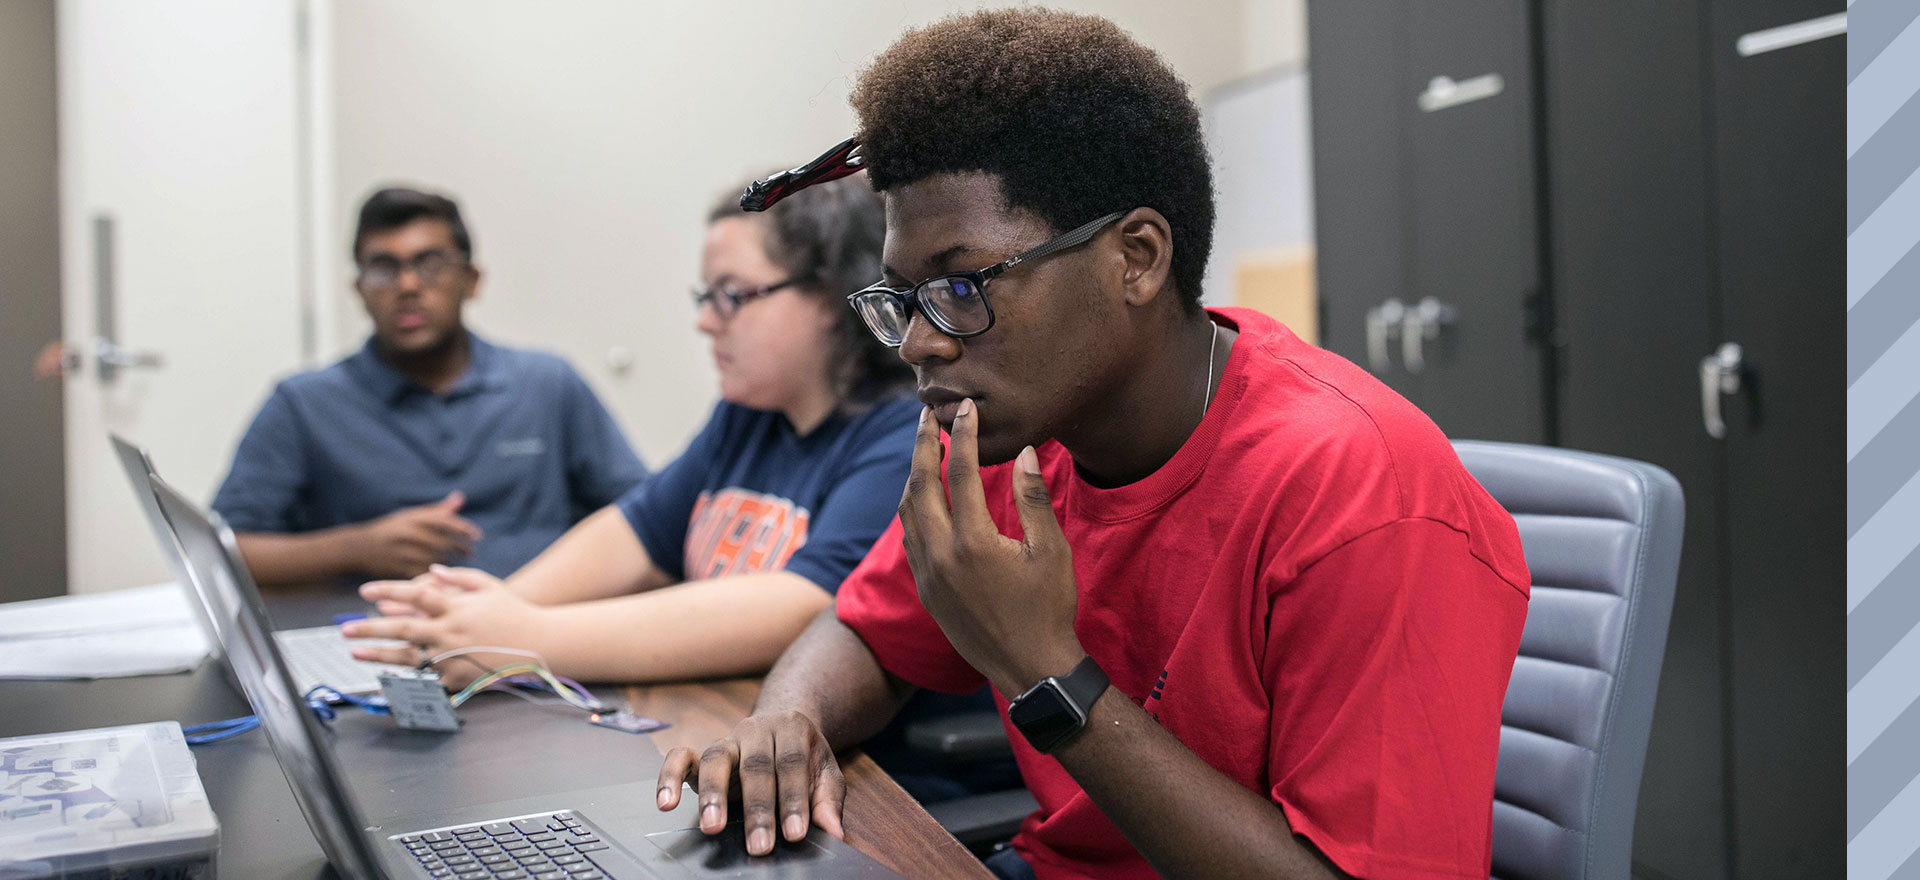 Young African-American man in foreground looks intently into laptop screen. In the background are a female and male student.